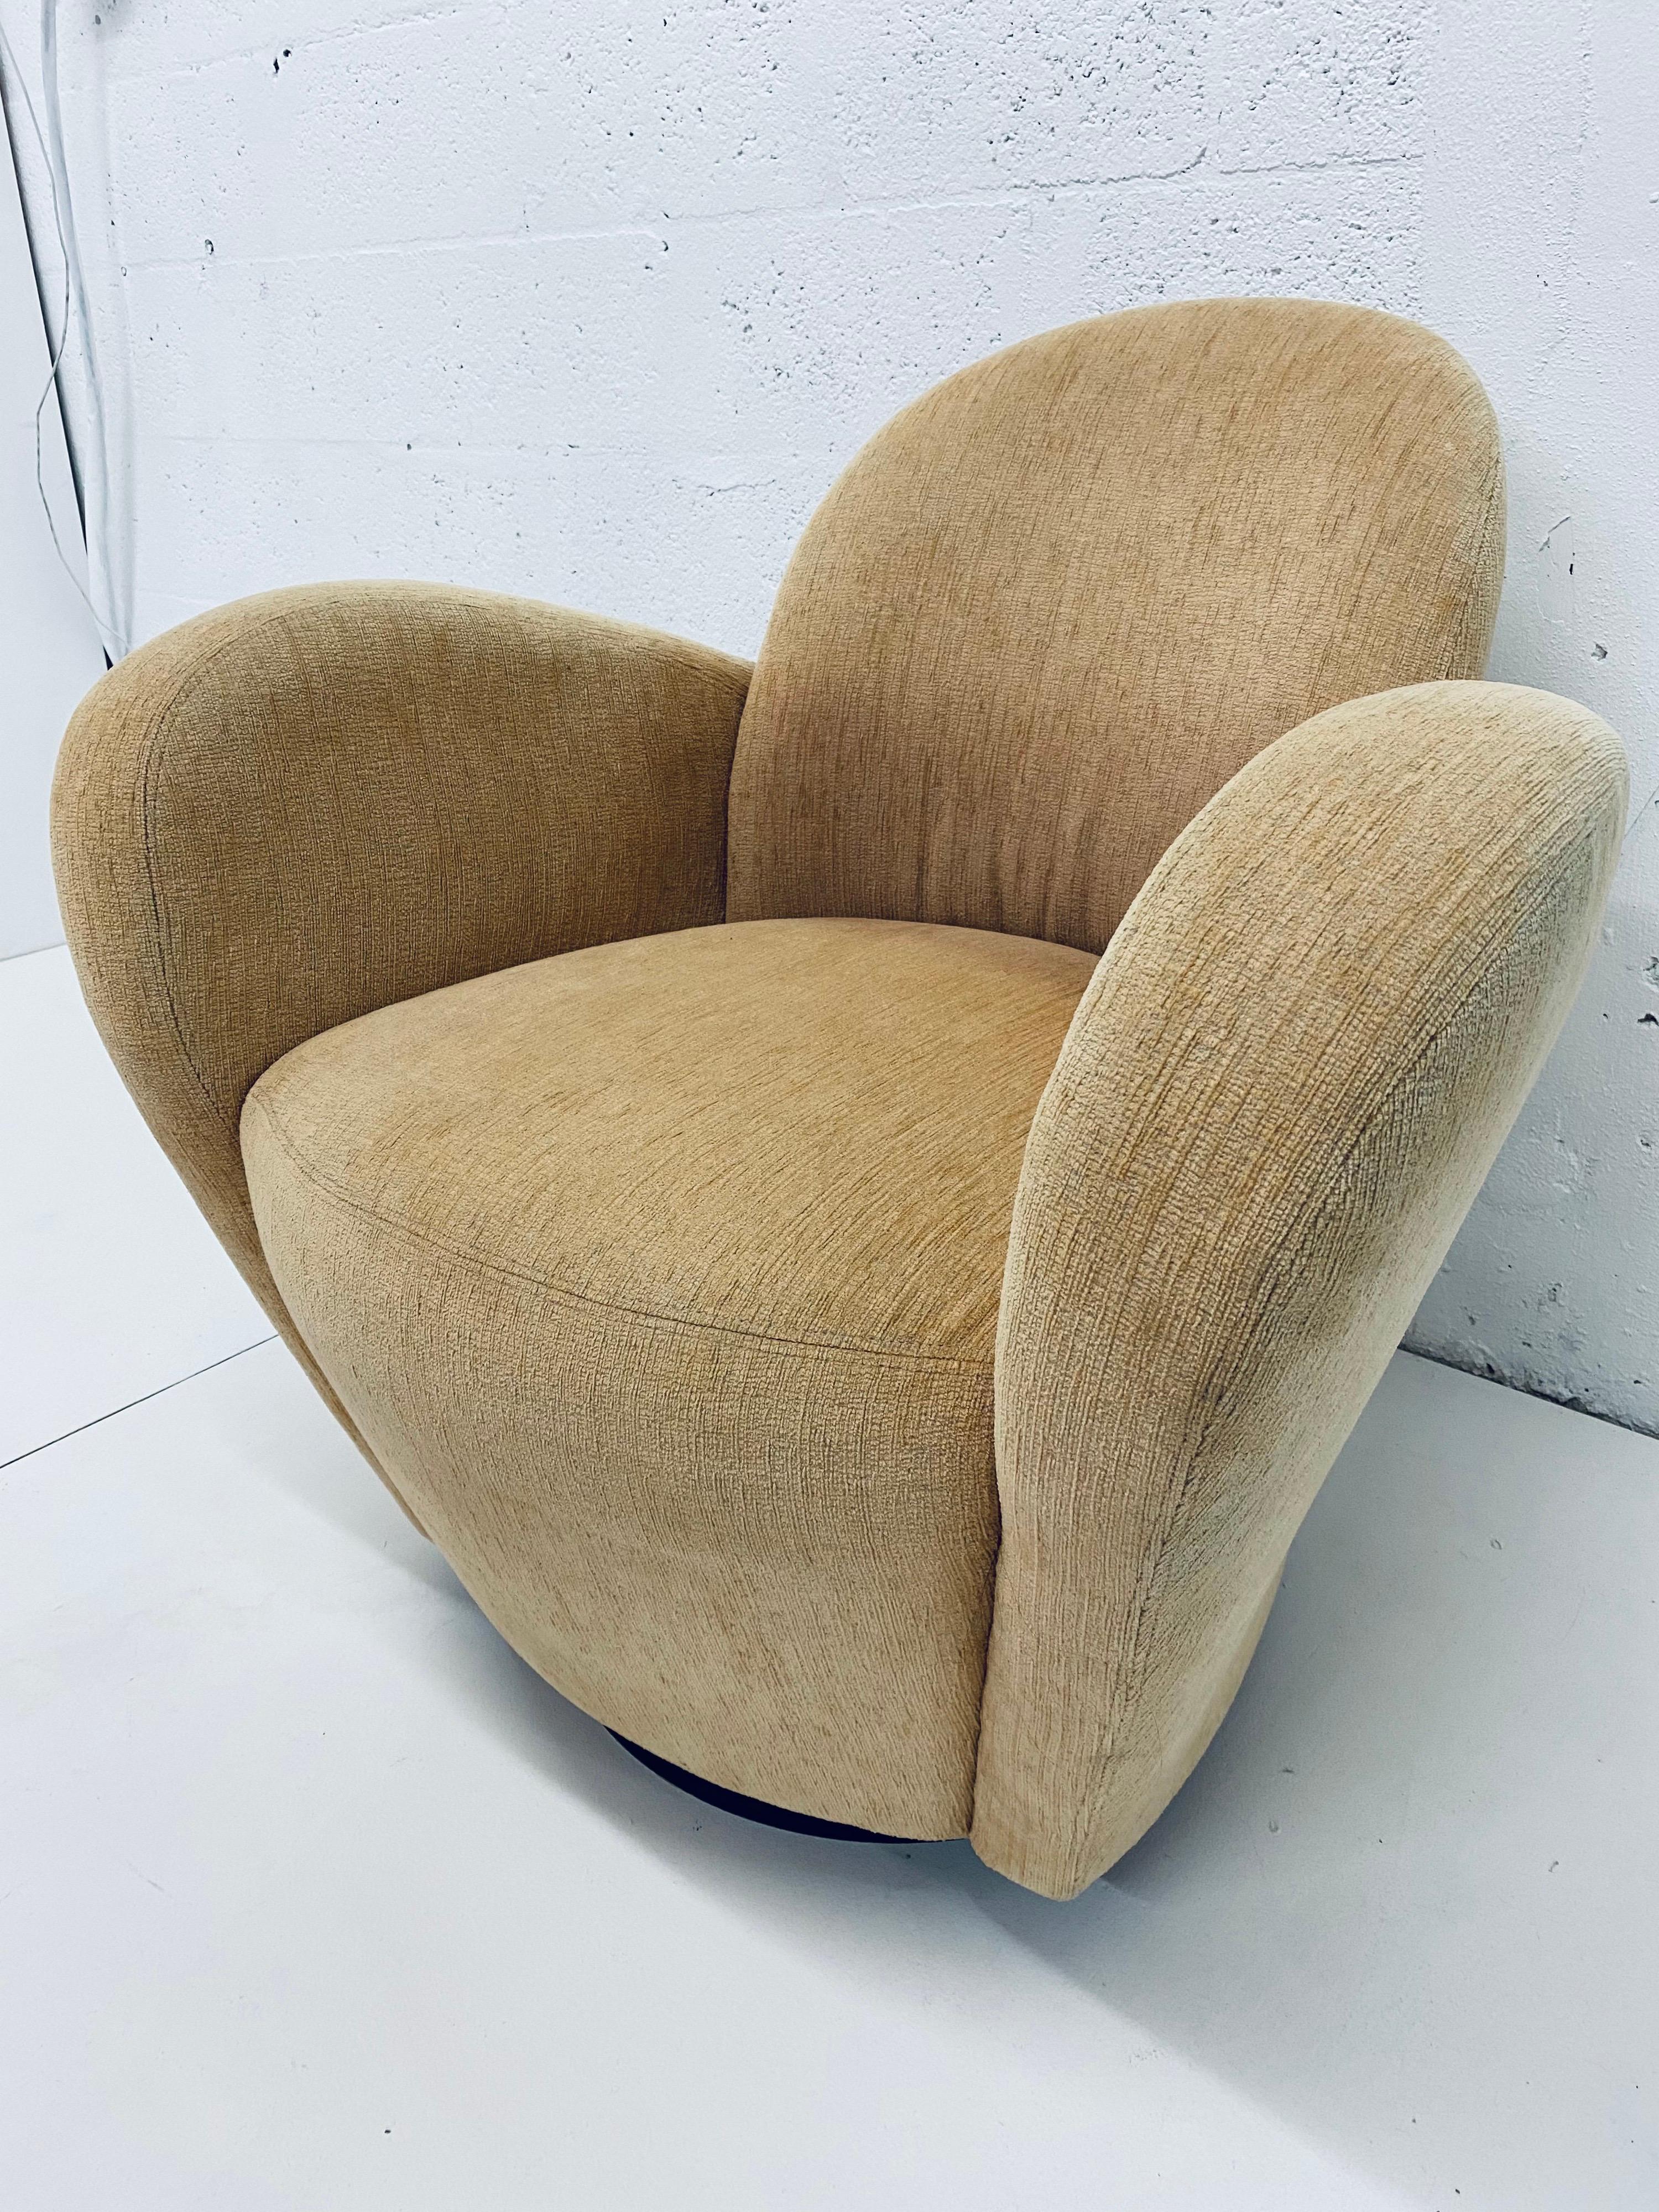 This iconic Michael Wolk designed Miami lounge chair sits on a swivel base and is ready for new upholstery.

While driving through coconut grove, Florida in the early 1980s, Wolk passed an interesting hedge. This hedge quickly became the